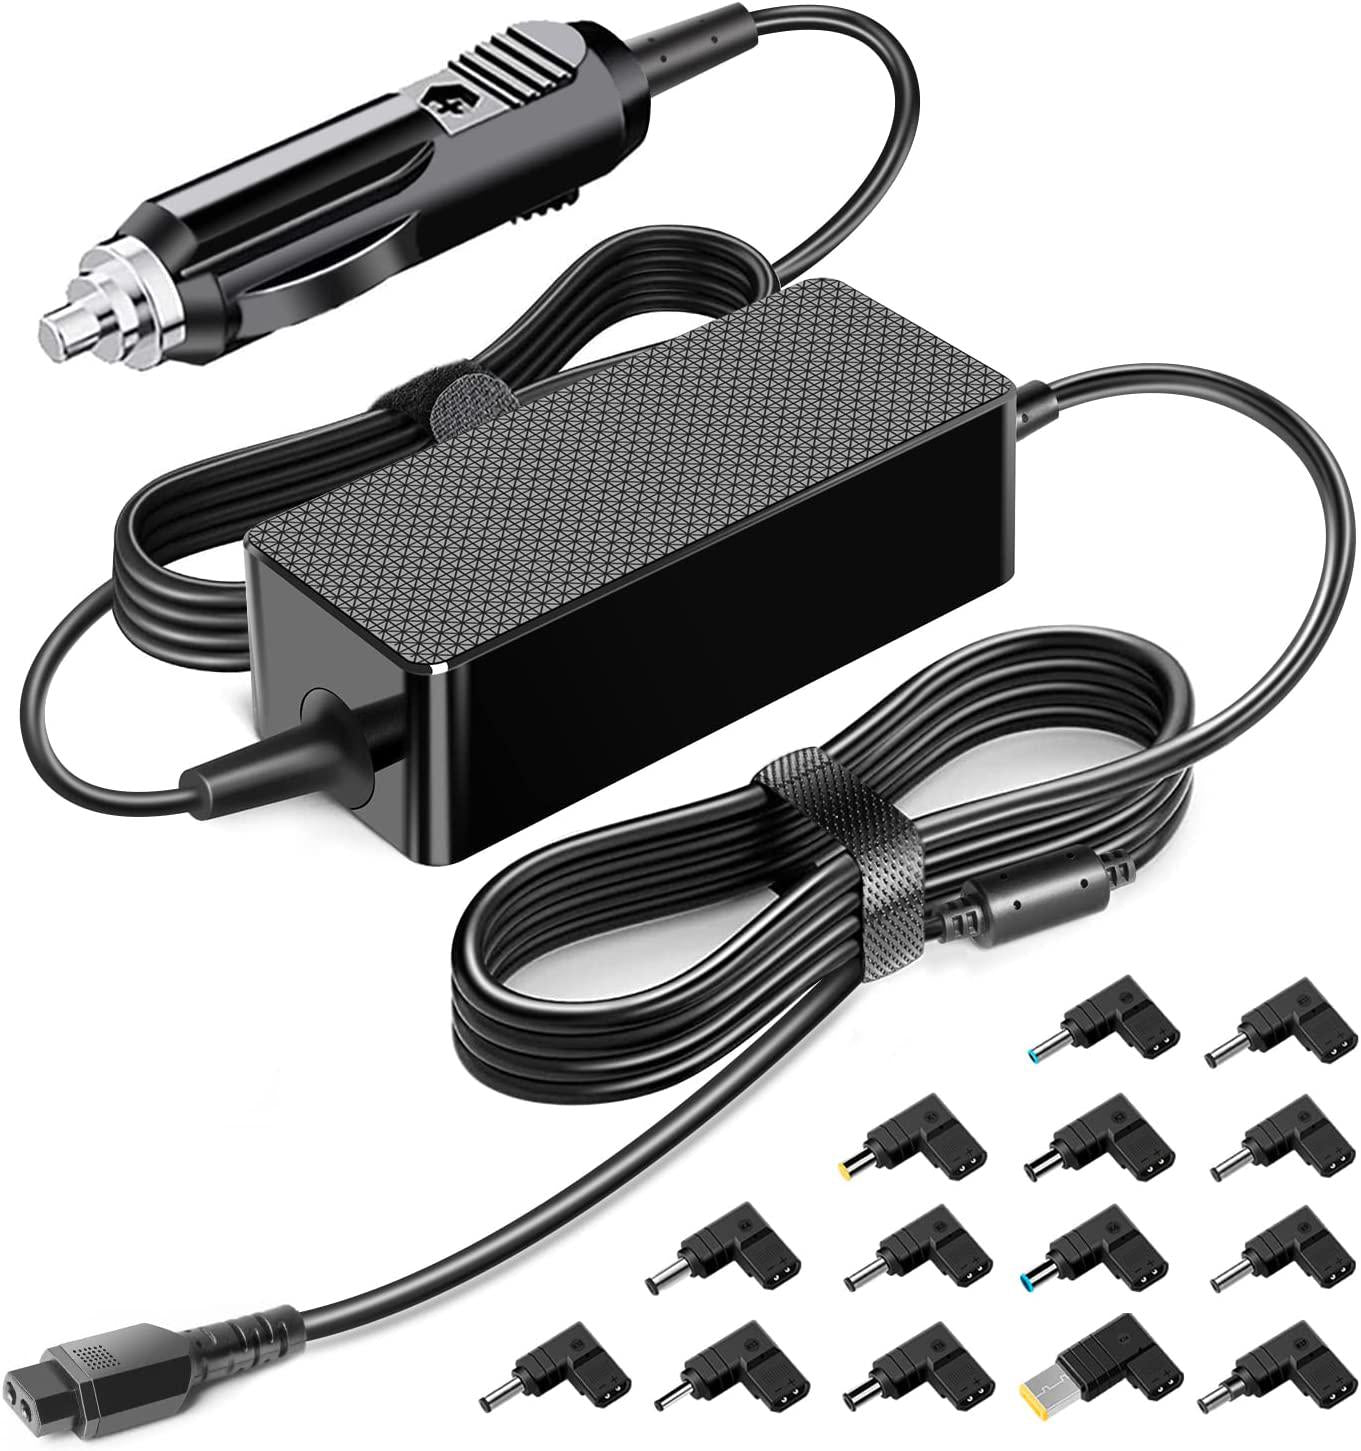 KFD, KFD 100W 90W 65W Car Vehicle Universal Laptop Adapter Power Supply for HP Dell Toshiba Satellite Gateway IBM ThinkPad Acer ASUS Compaq Samsung Sony Fujitsu Notebook Computer Travel DC Power Charger